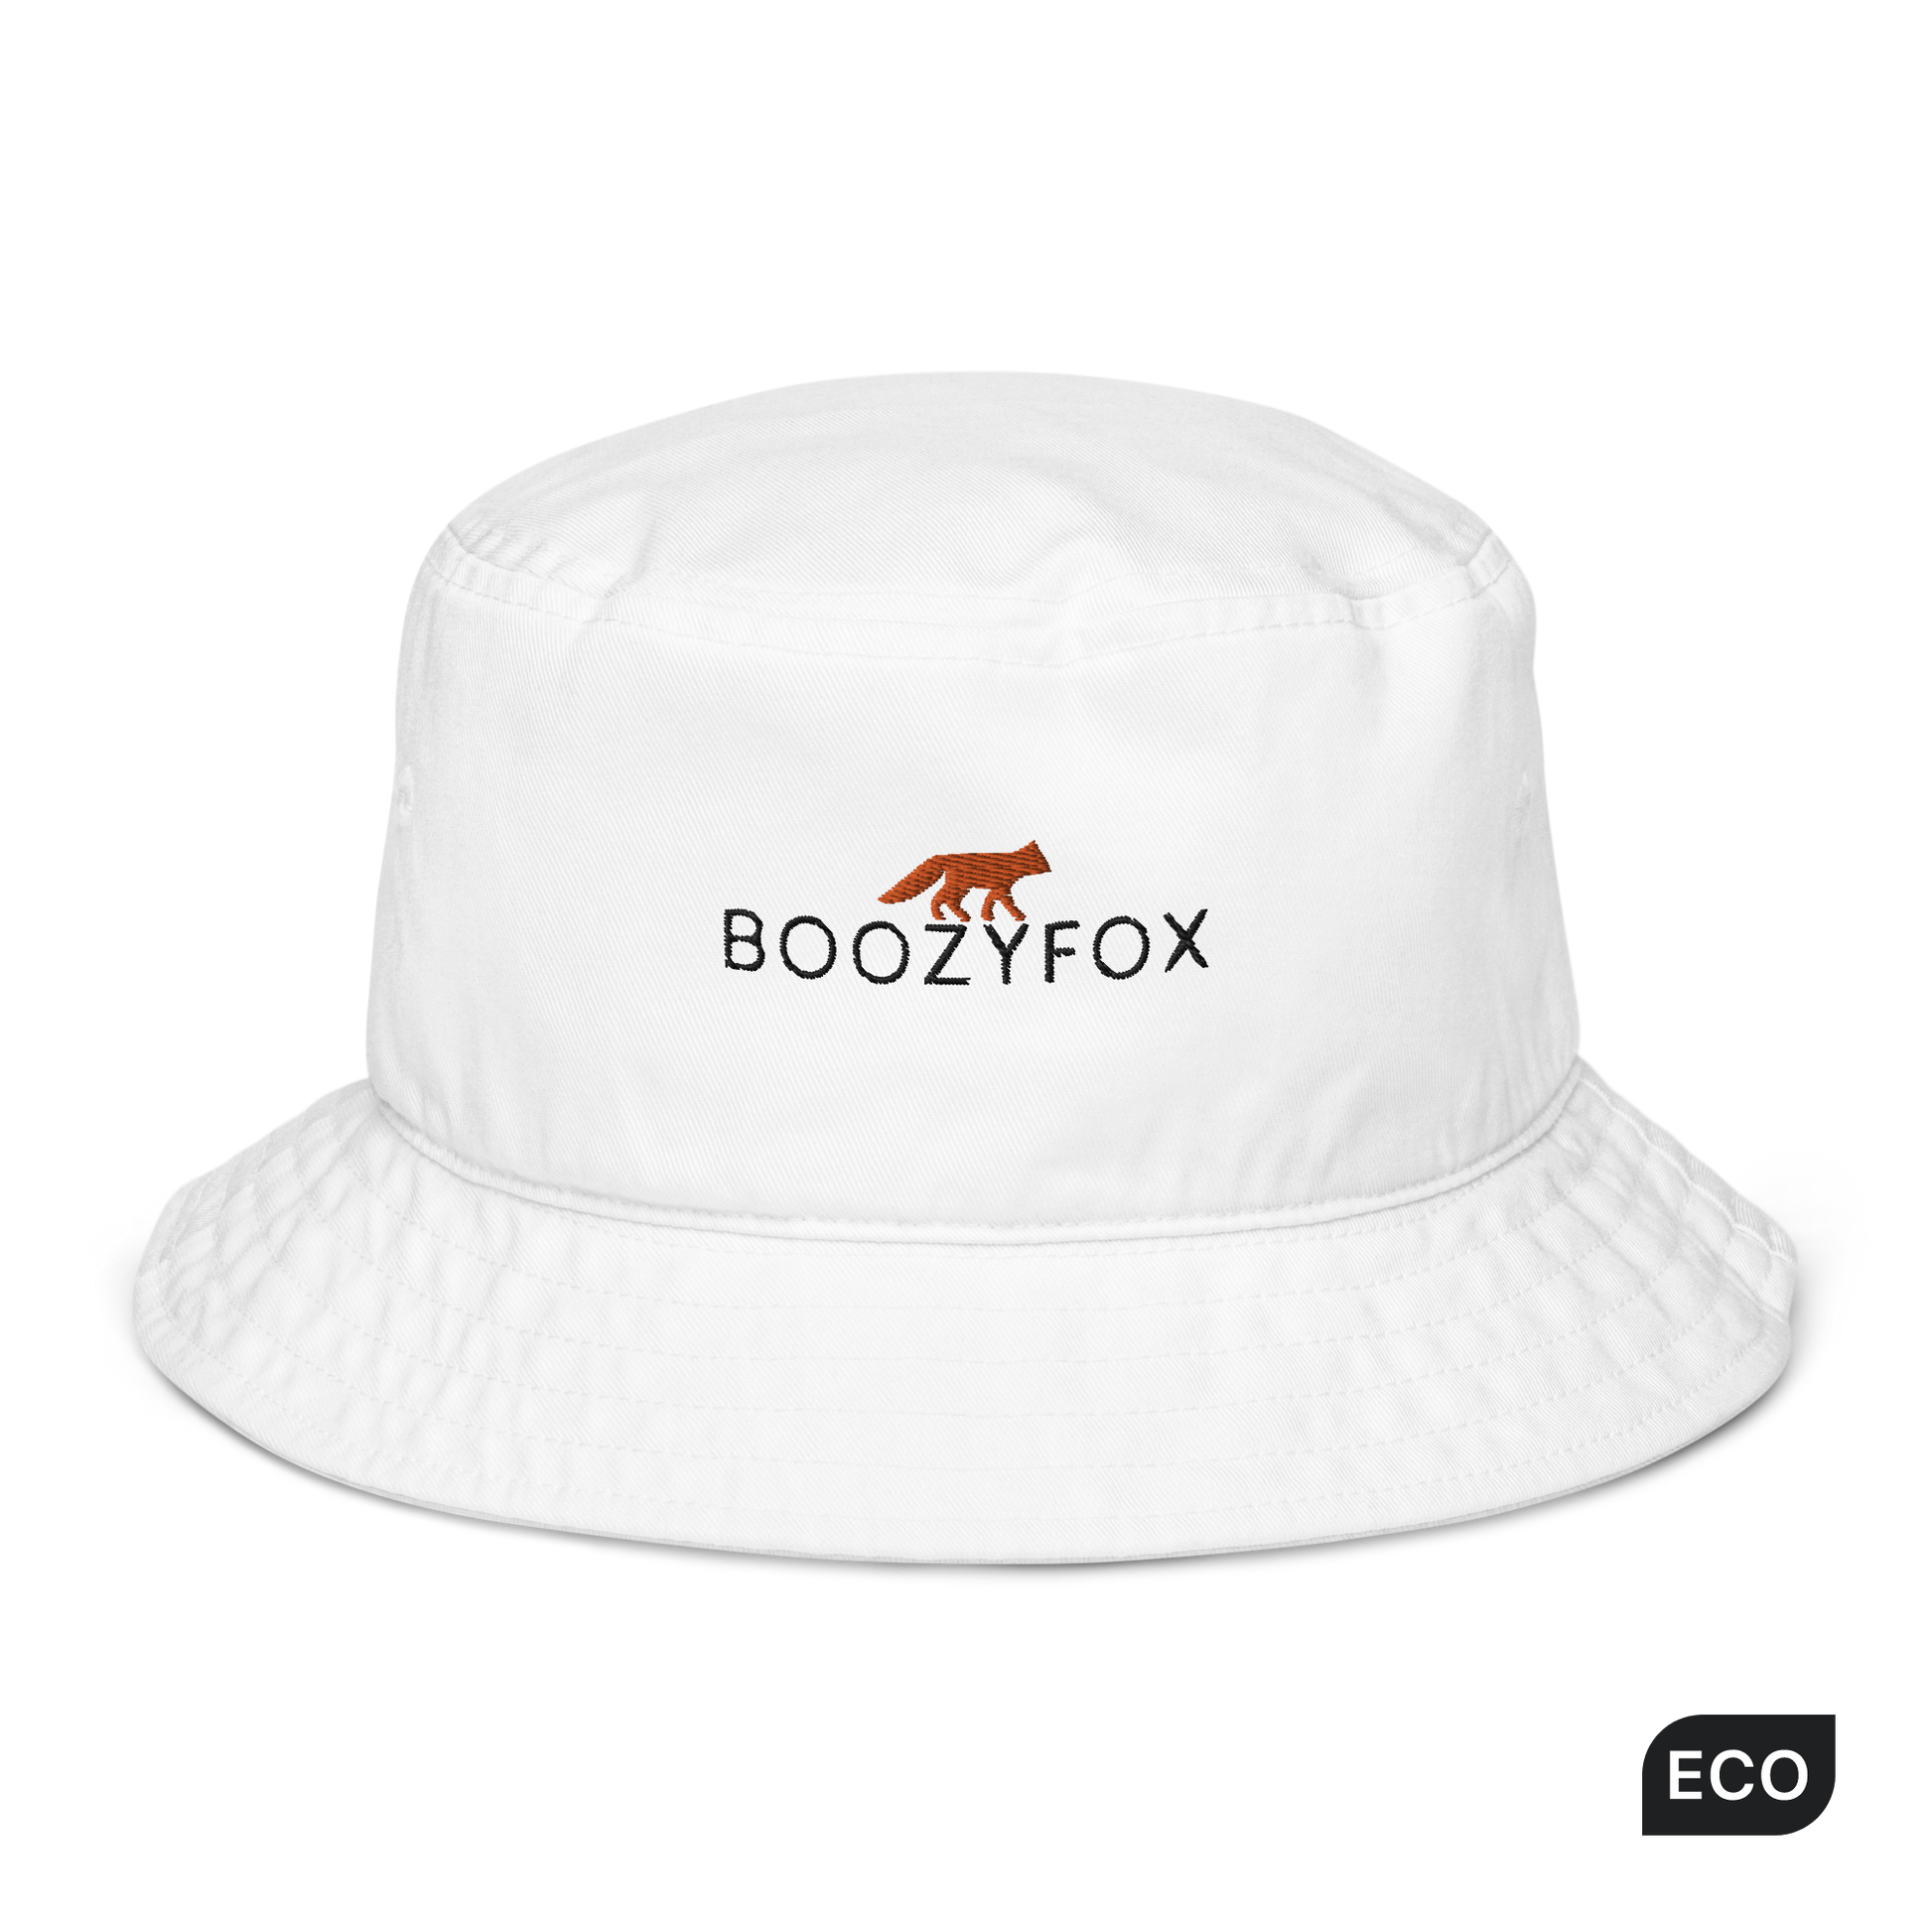 White Organic Bucket Hat featuring a recognizable Boozy Fox embroidery logo on the front - Bucket Hats - Boozy Fox